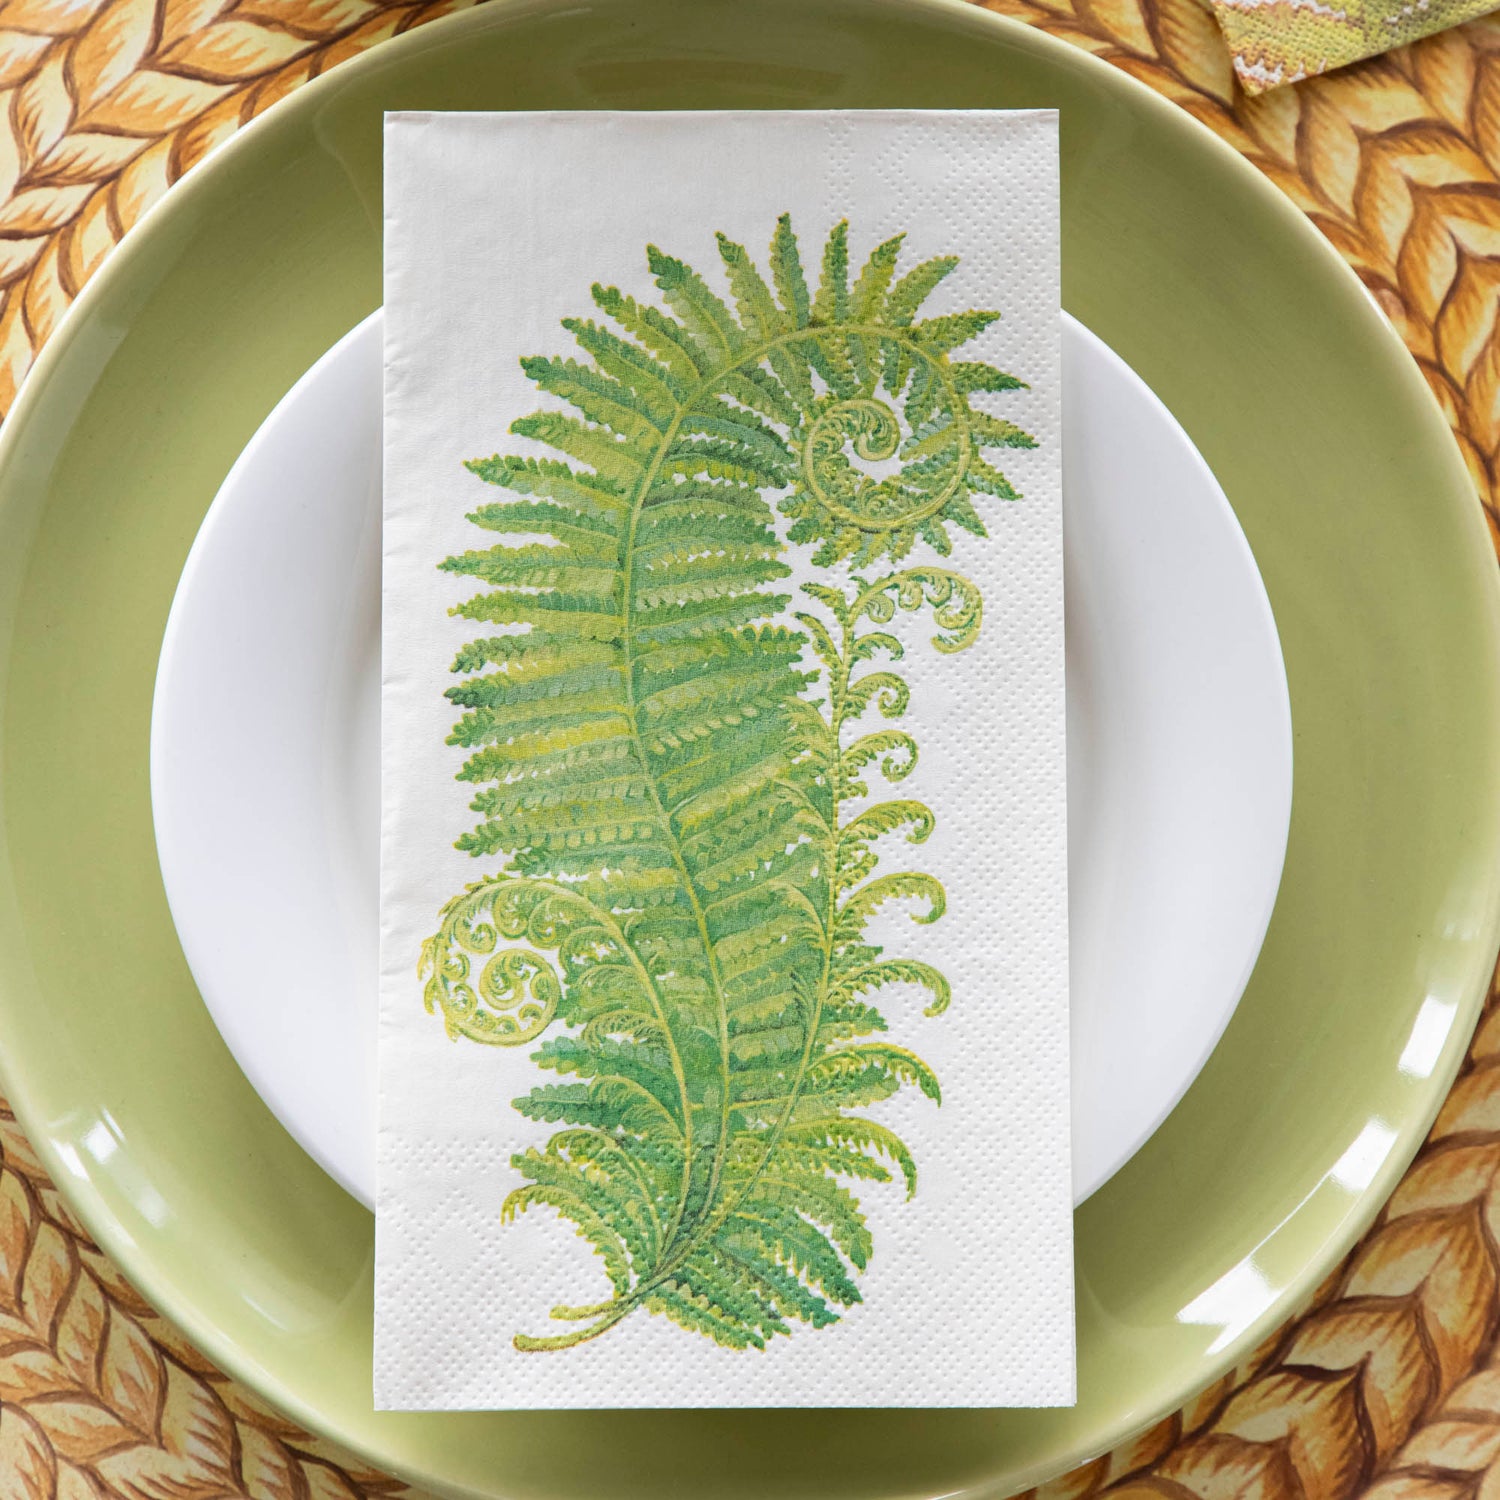 A Fern Guest Napkin on a place in an elegant place setting, from above.